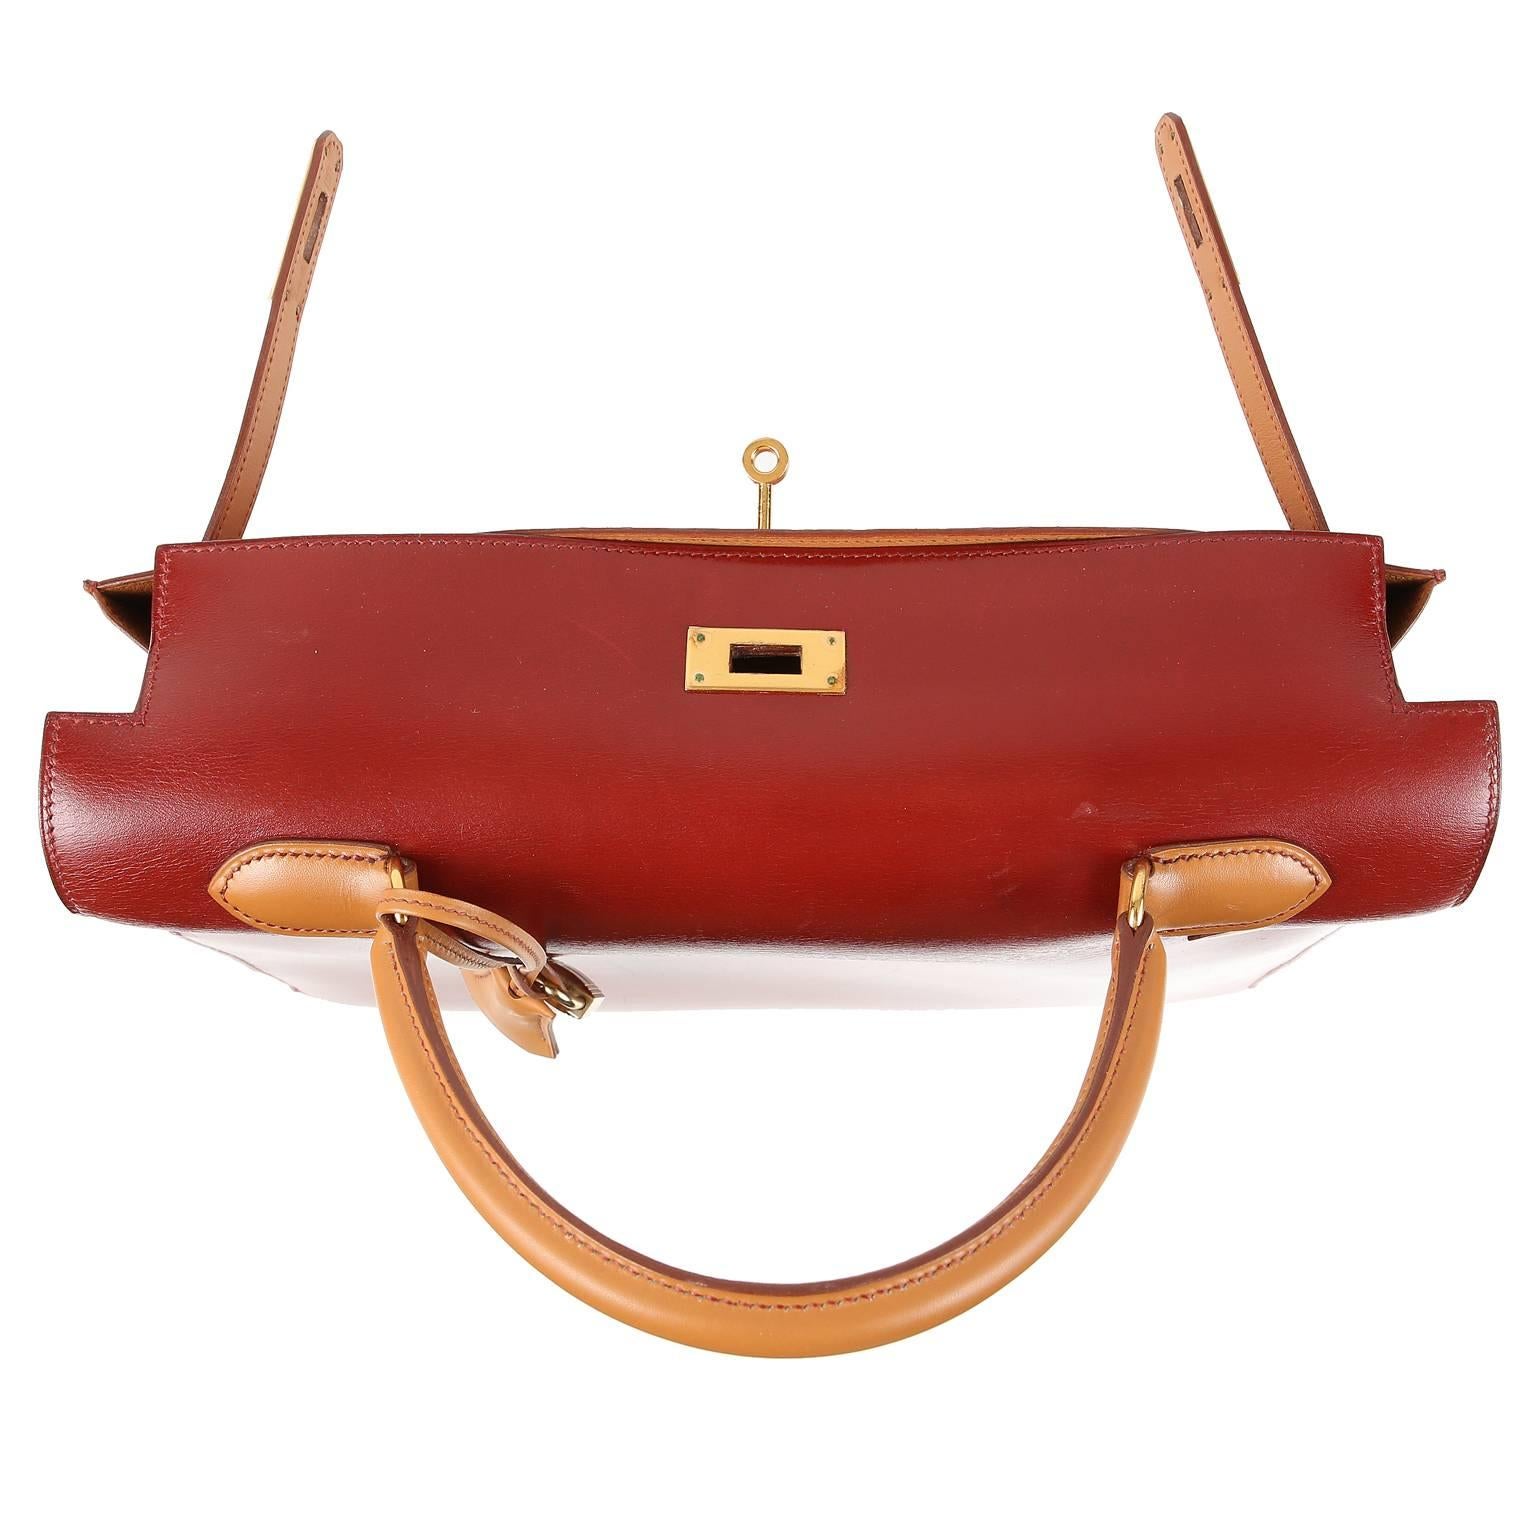 Hermès Tri Color Box Calf 35 cm Kelly Sellier- Red, Rouge H, Gold 3